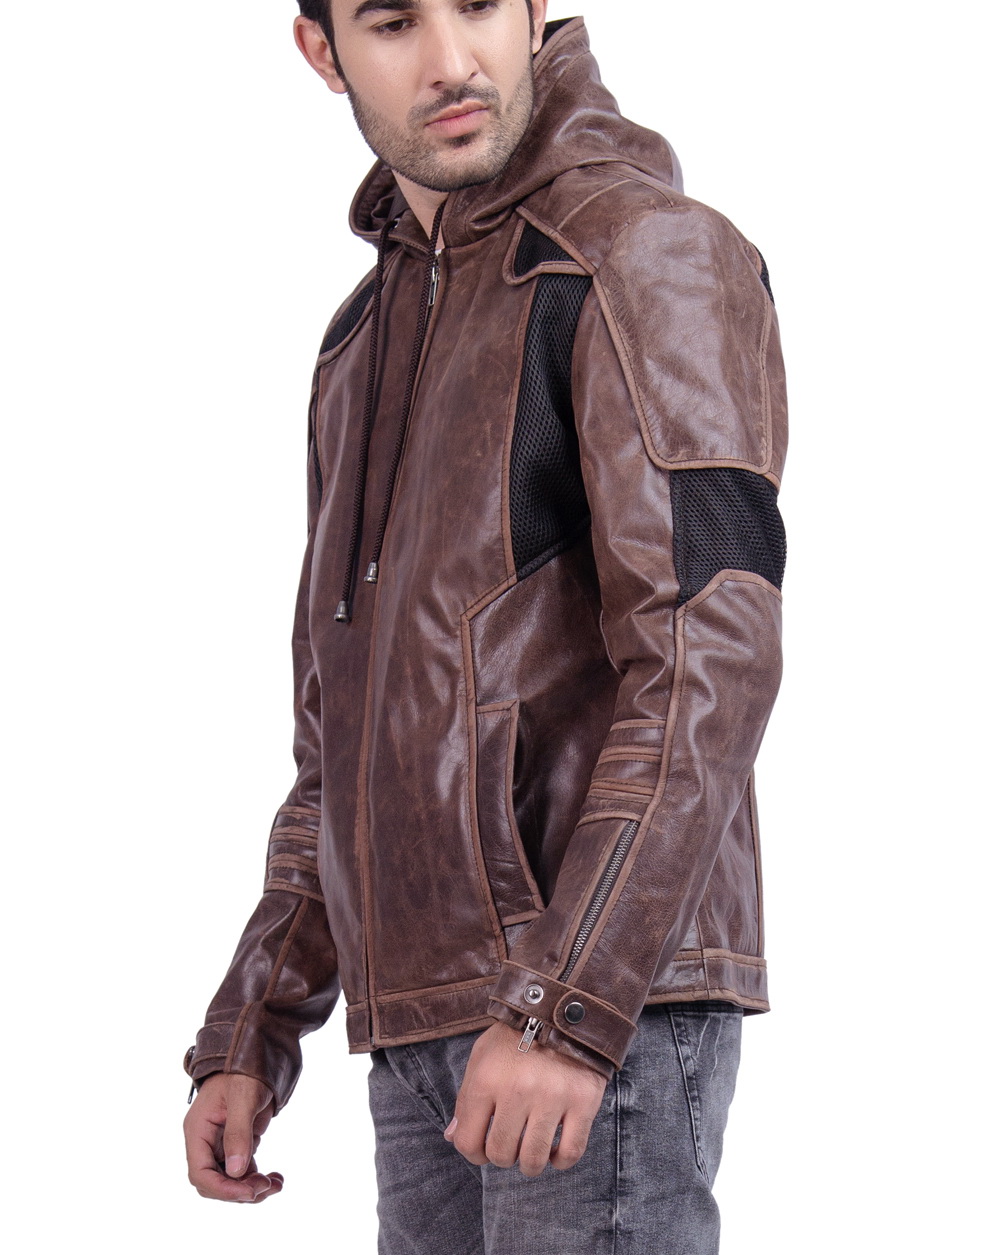 GAVIN REED DETROIT BECOME HUMAN LEATHER JACKET